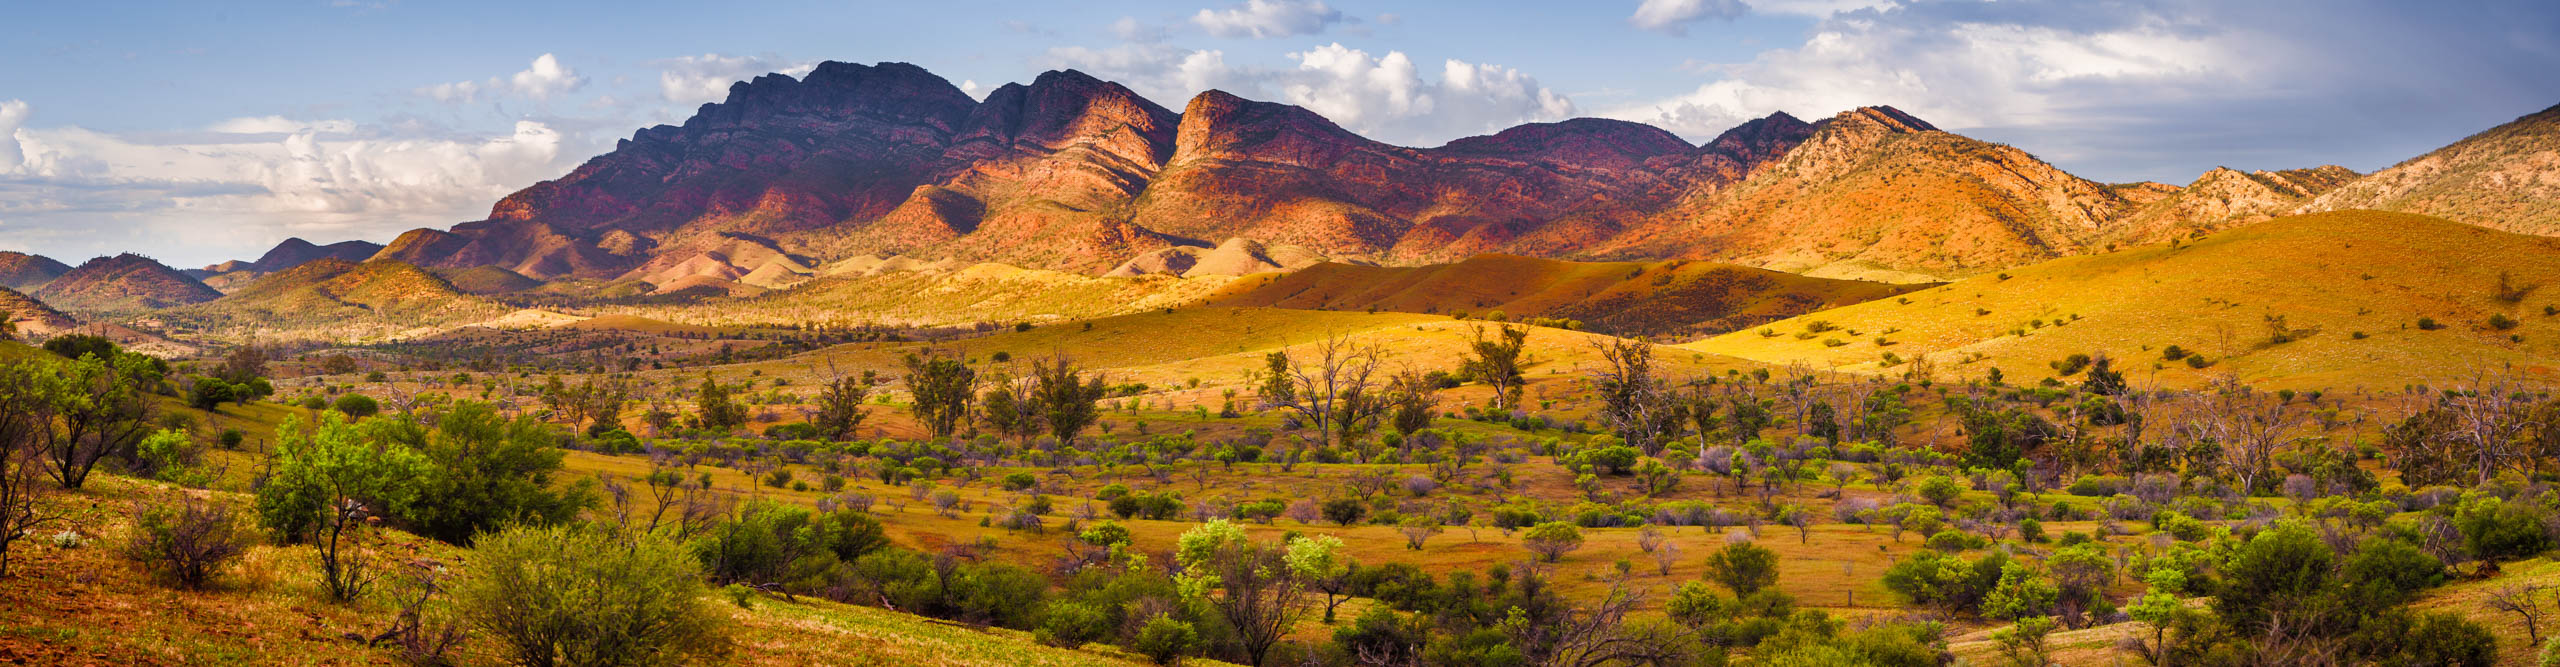 Sunset over the Flinders Ranges, with the mountains glowing red and orange, South Australia